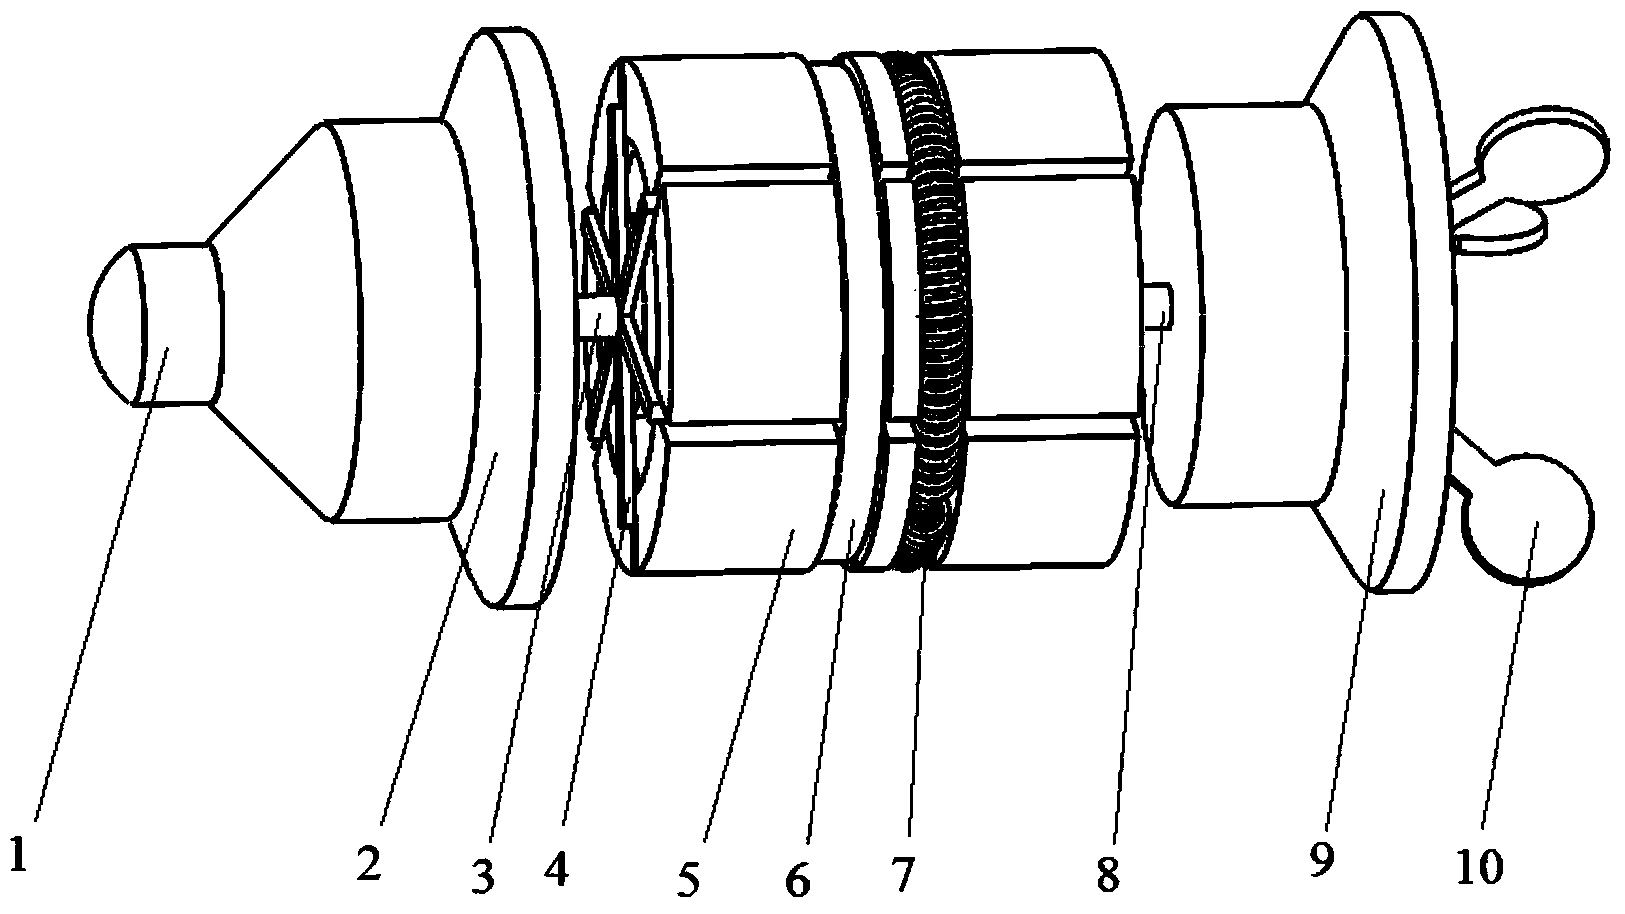 Pipeline inspection device based on rotating electromagnetic field